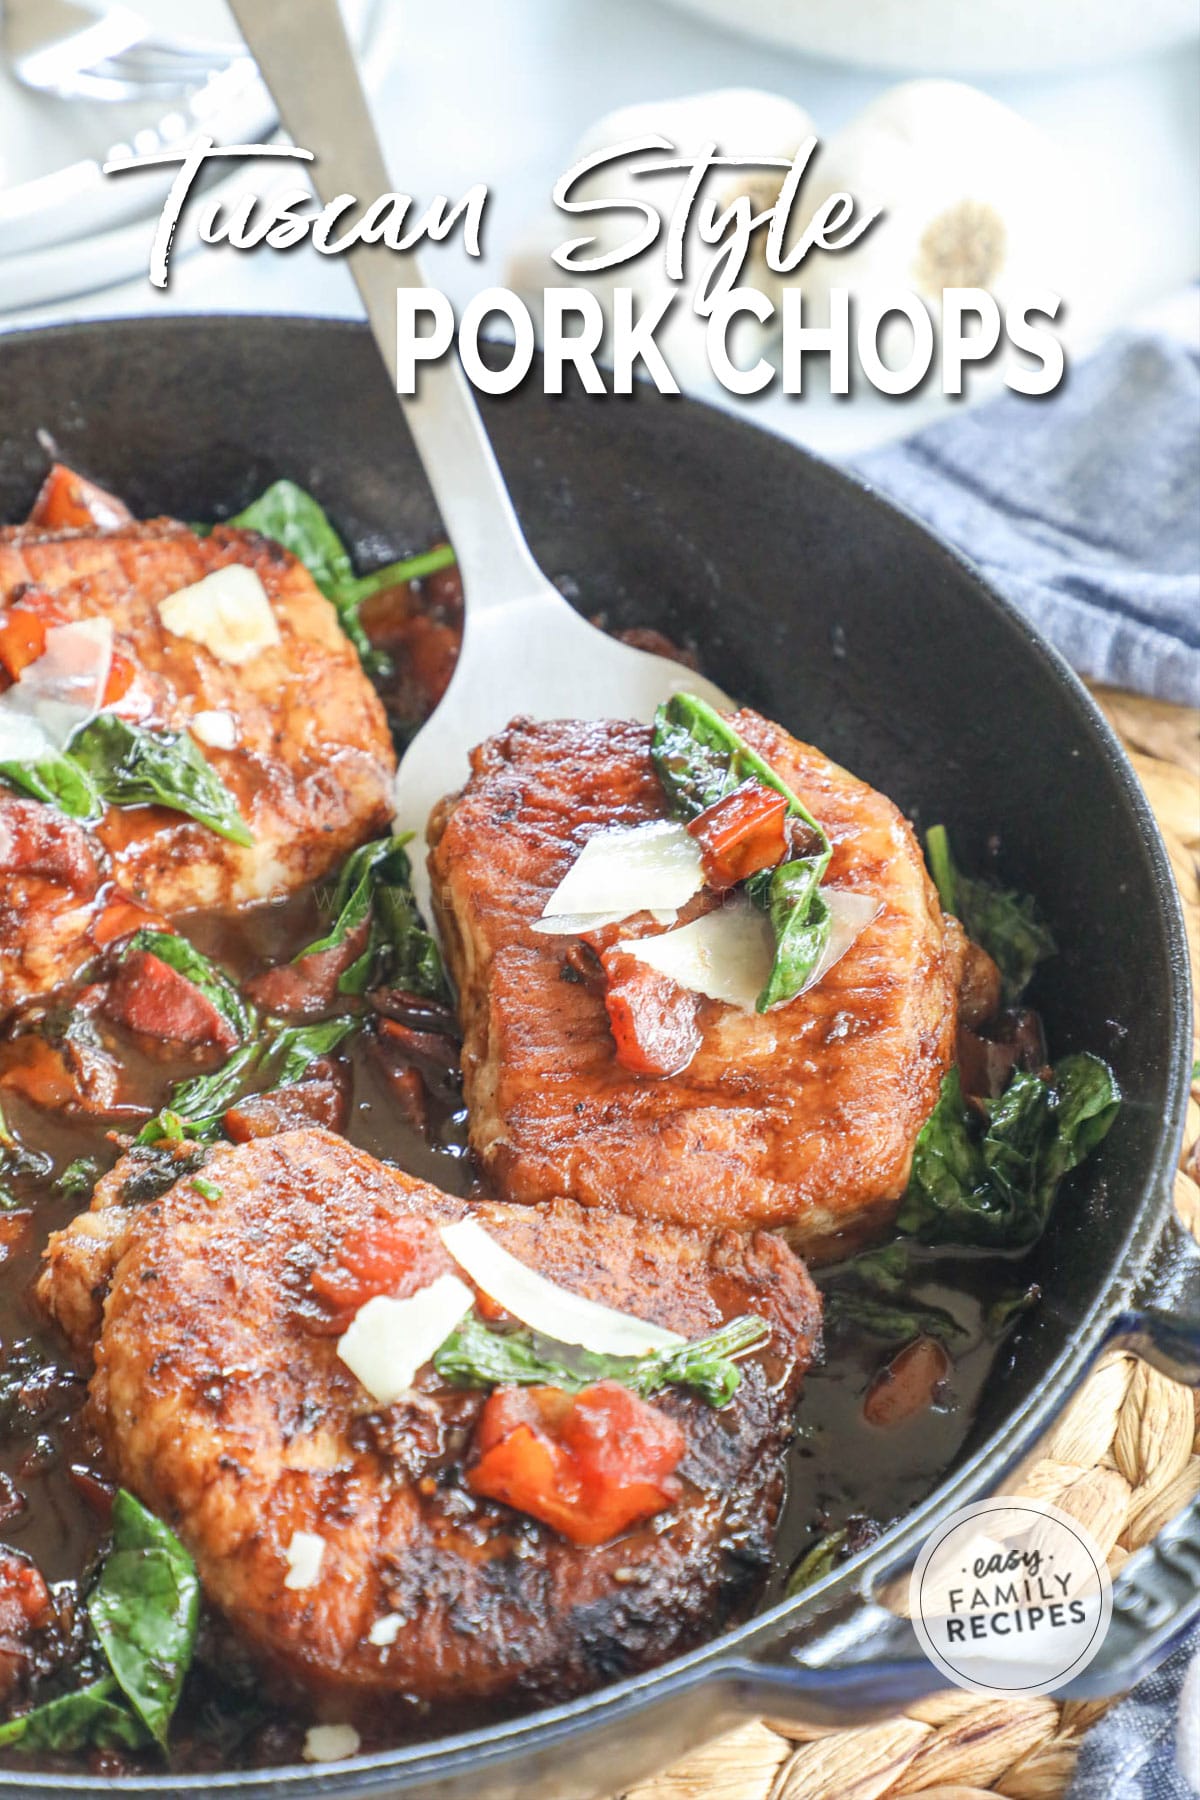 Lifting a boneless tuscan pork chop from skillet to serve as an easy dinner